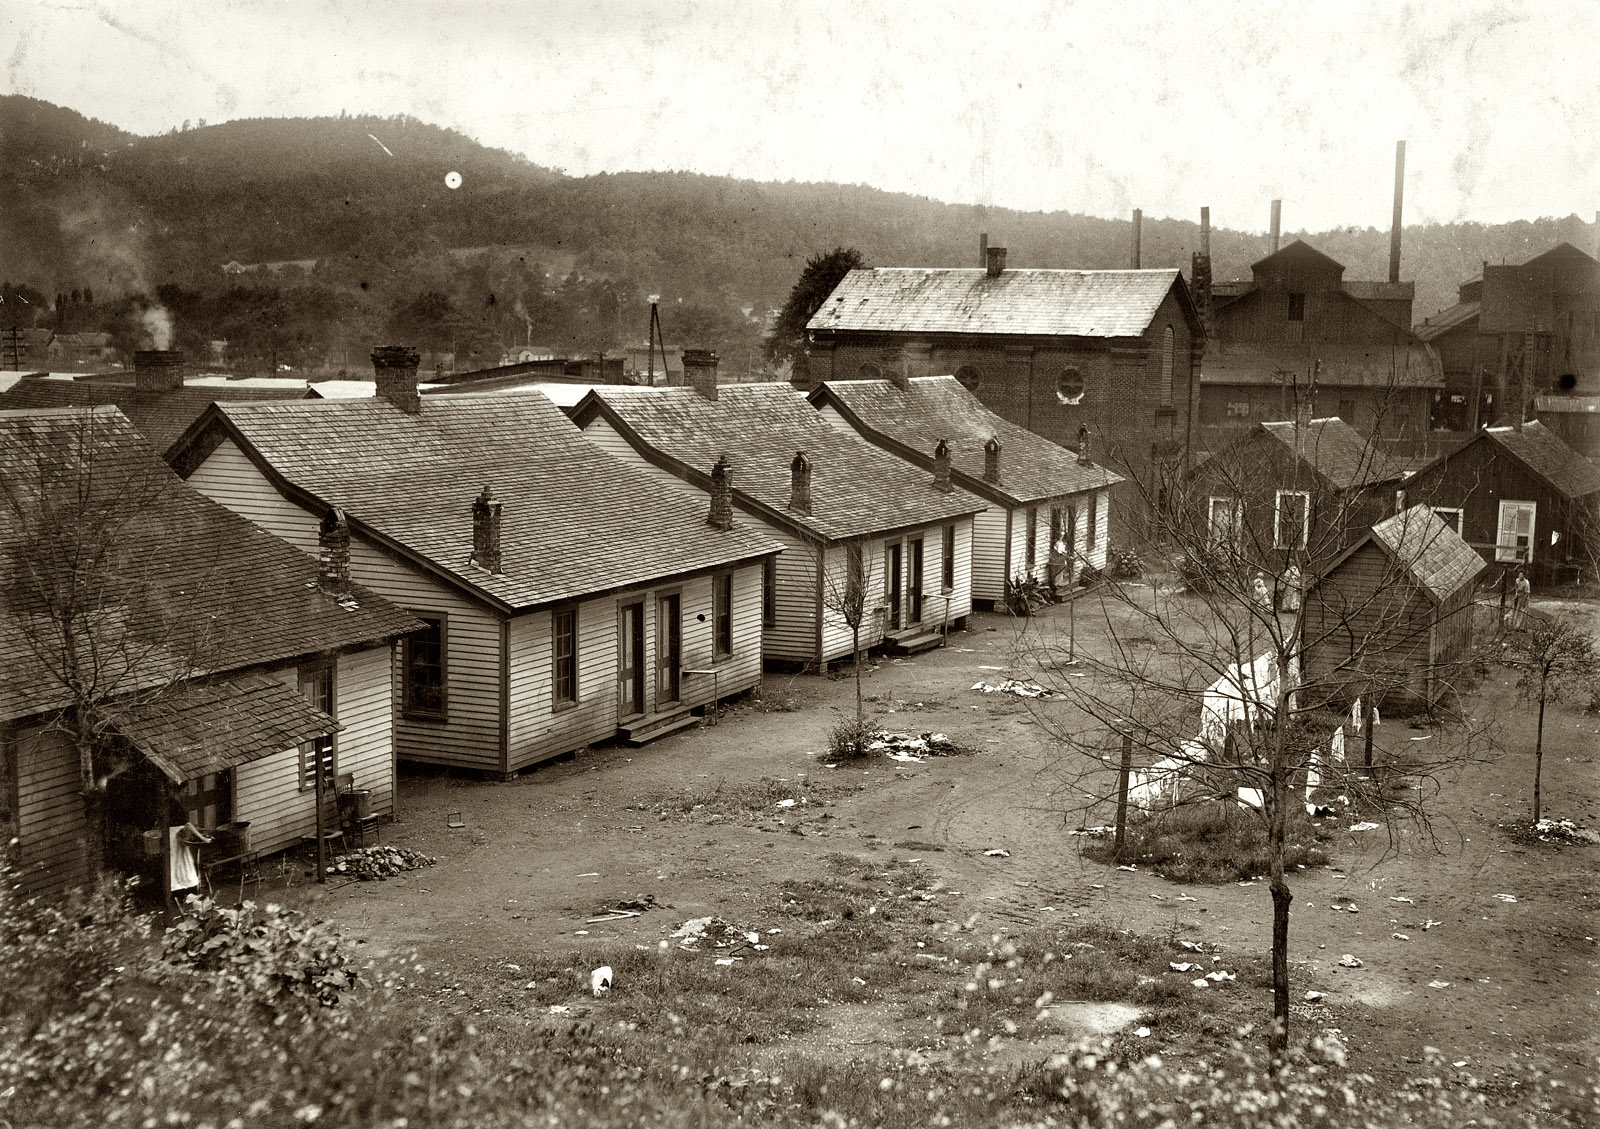 October 1914. Anniston, Alabama. "Housing conditions at Adelaide Mill. The village is run down and greatly in need of sanitary improvements." Photograph and caption by Lewis Wickes Hine. View full size.